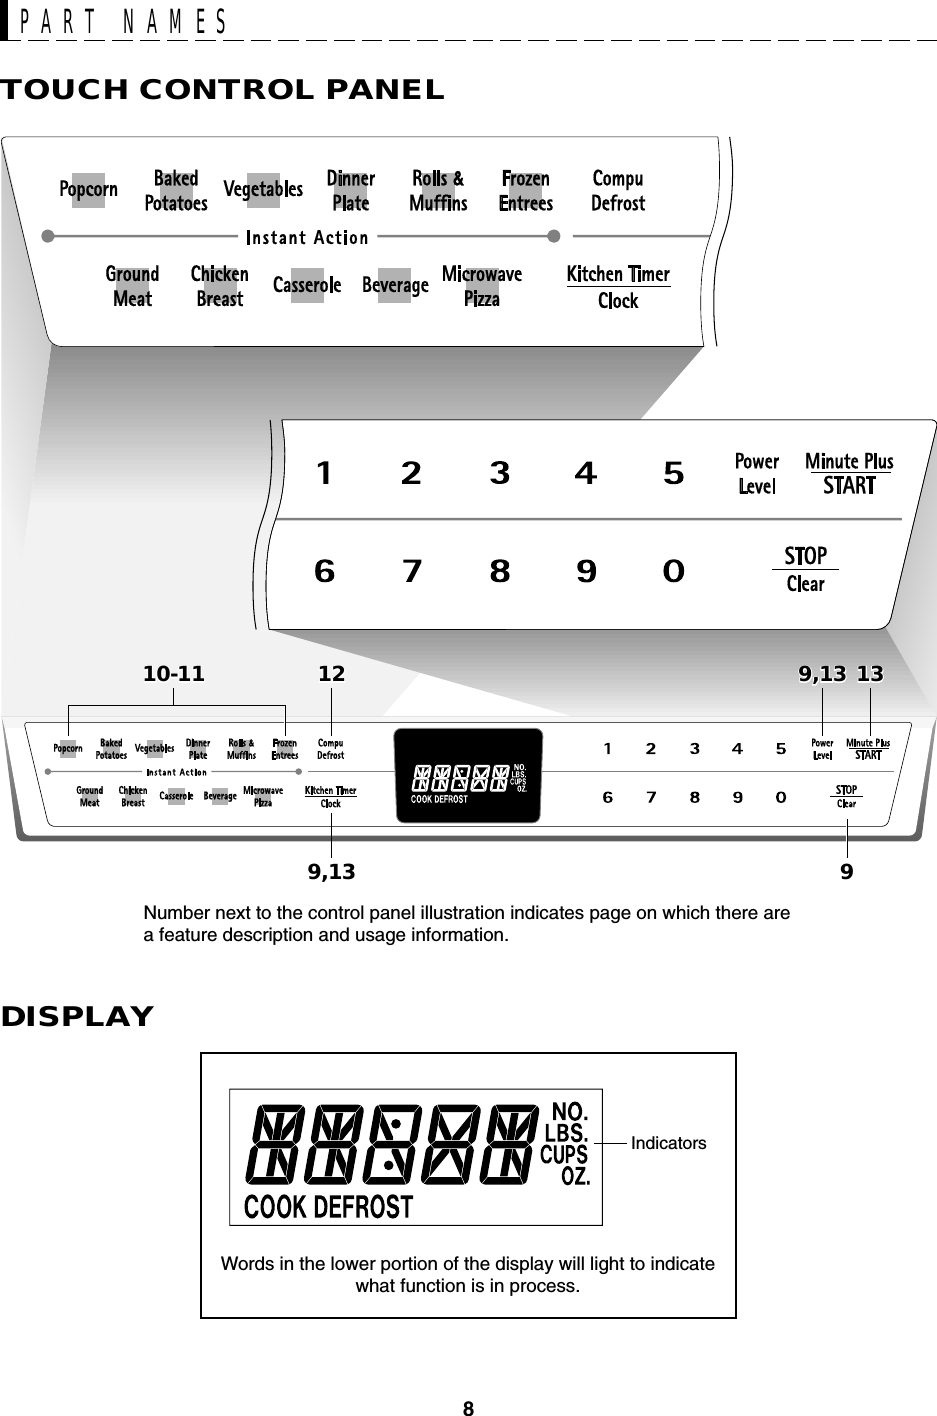 810-11 1210-11 129,139,139139,13 13IndicatorsPART NAMESNumber next to the control panel illustration indicates page on which there area feature description and usage information.TOUCH CONTROL PANELDISPLAYWords in the lower portion of the display will light to indicatewhat function is in process.